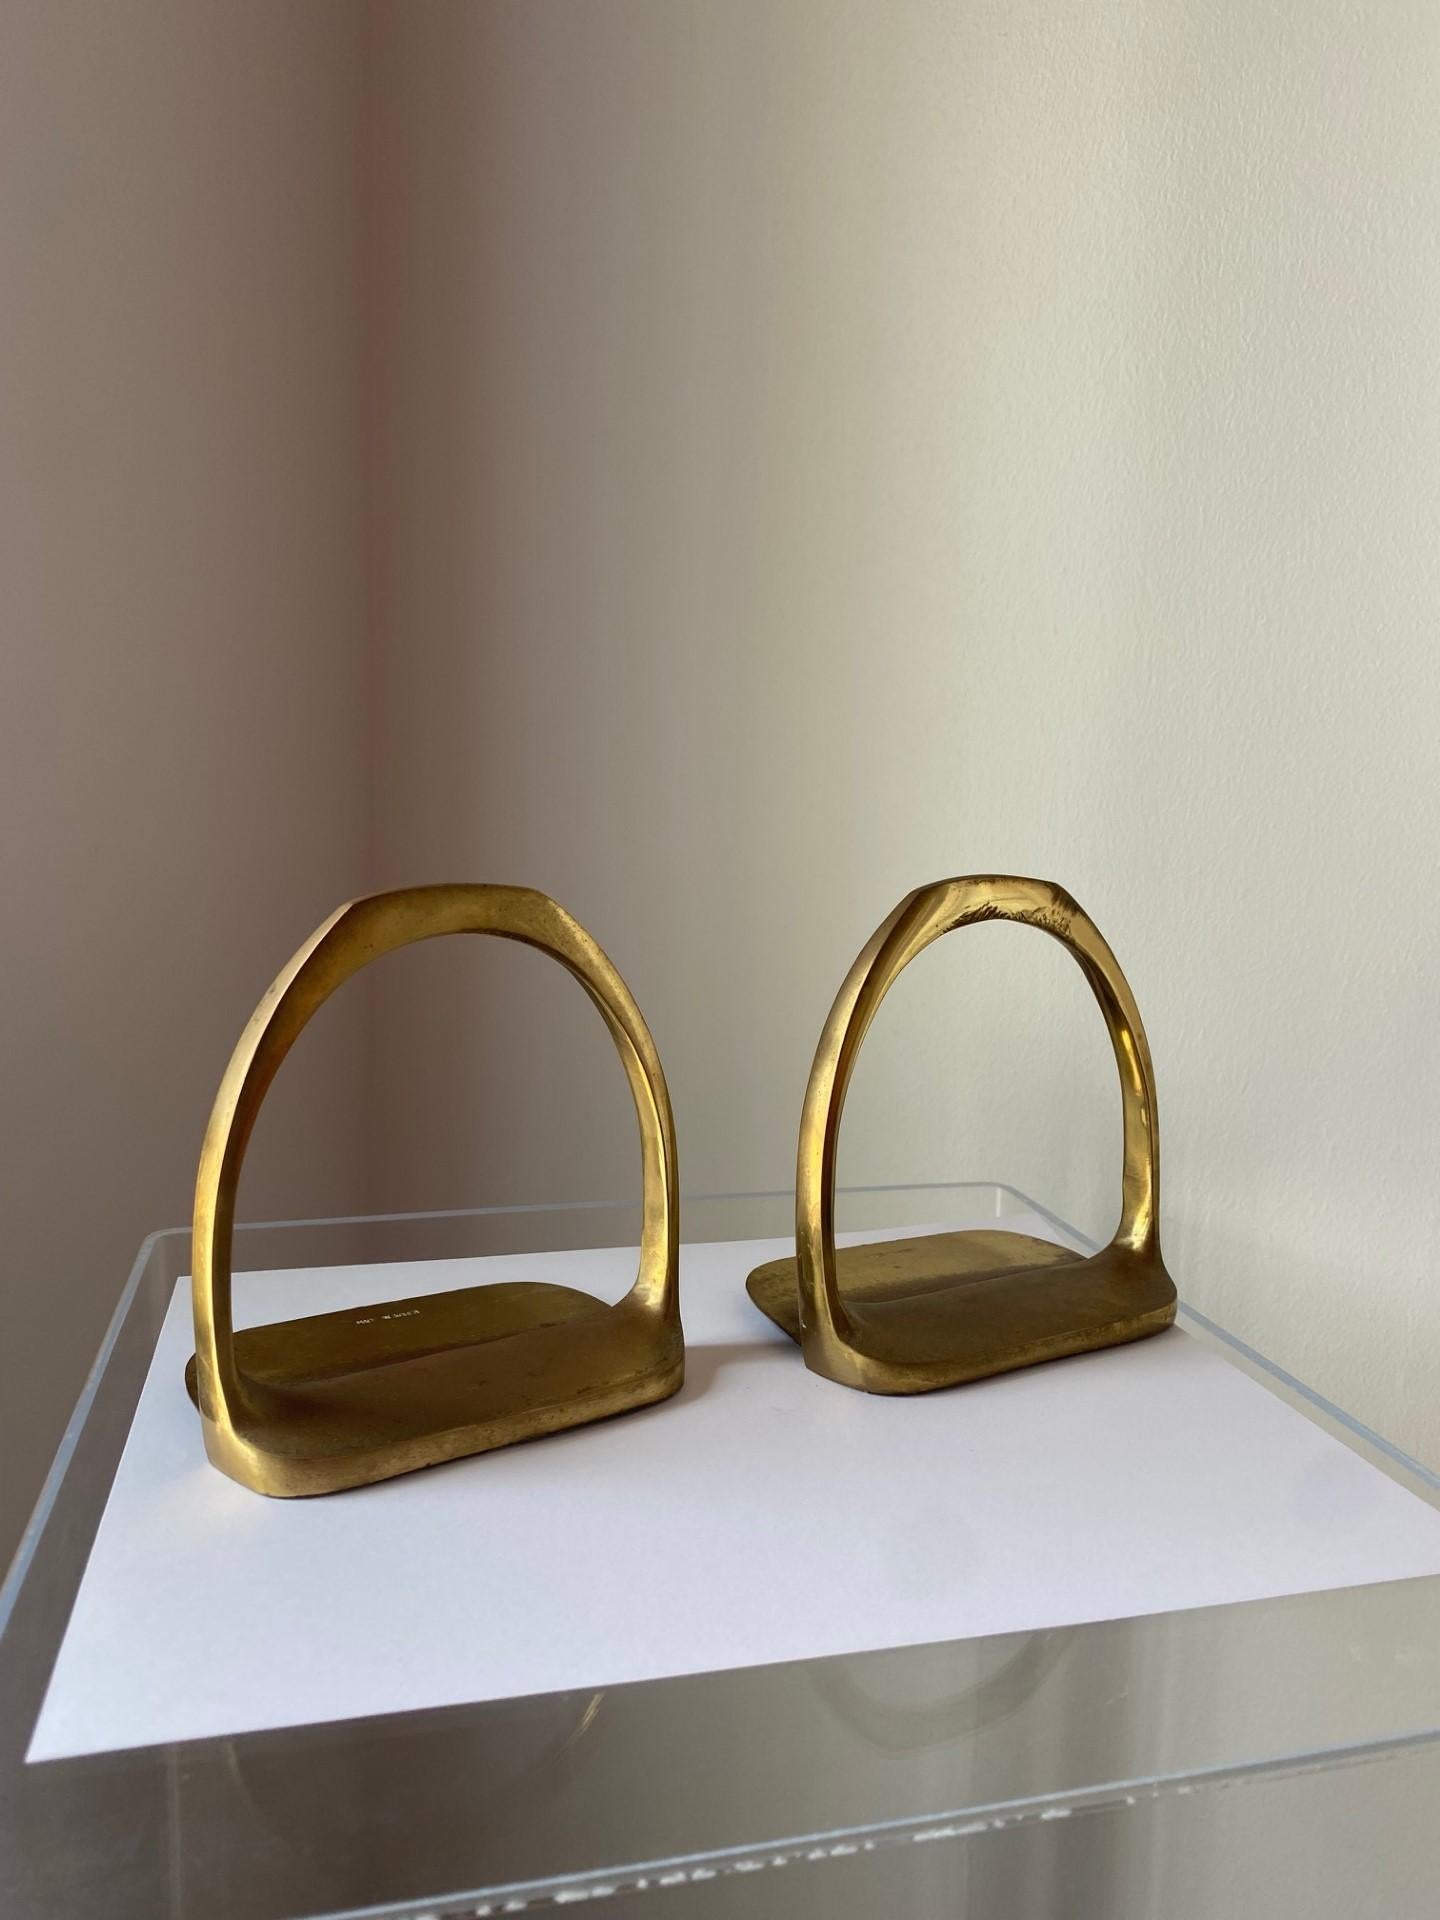 Beautiful pair of horse saddle stirrup bookends in brass.  This beautiful set is sure to create interesting impact in your décor or office.  The brass shapes are light on the eye but full of style.  The patina enhances the style and become an